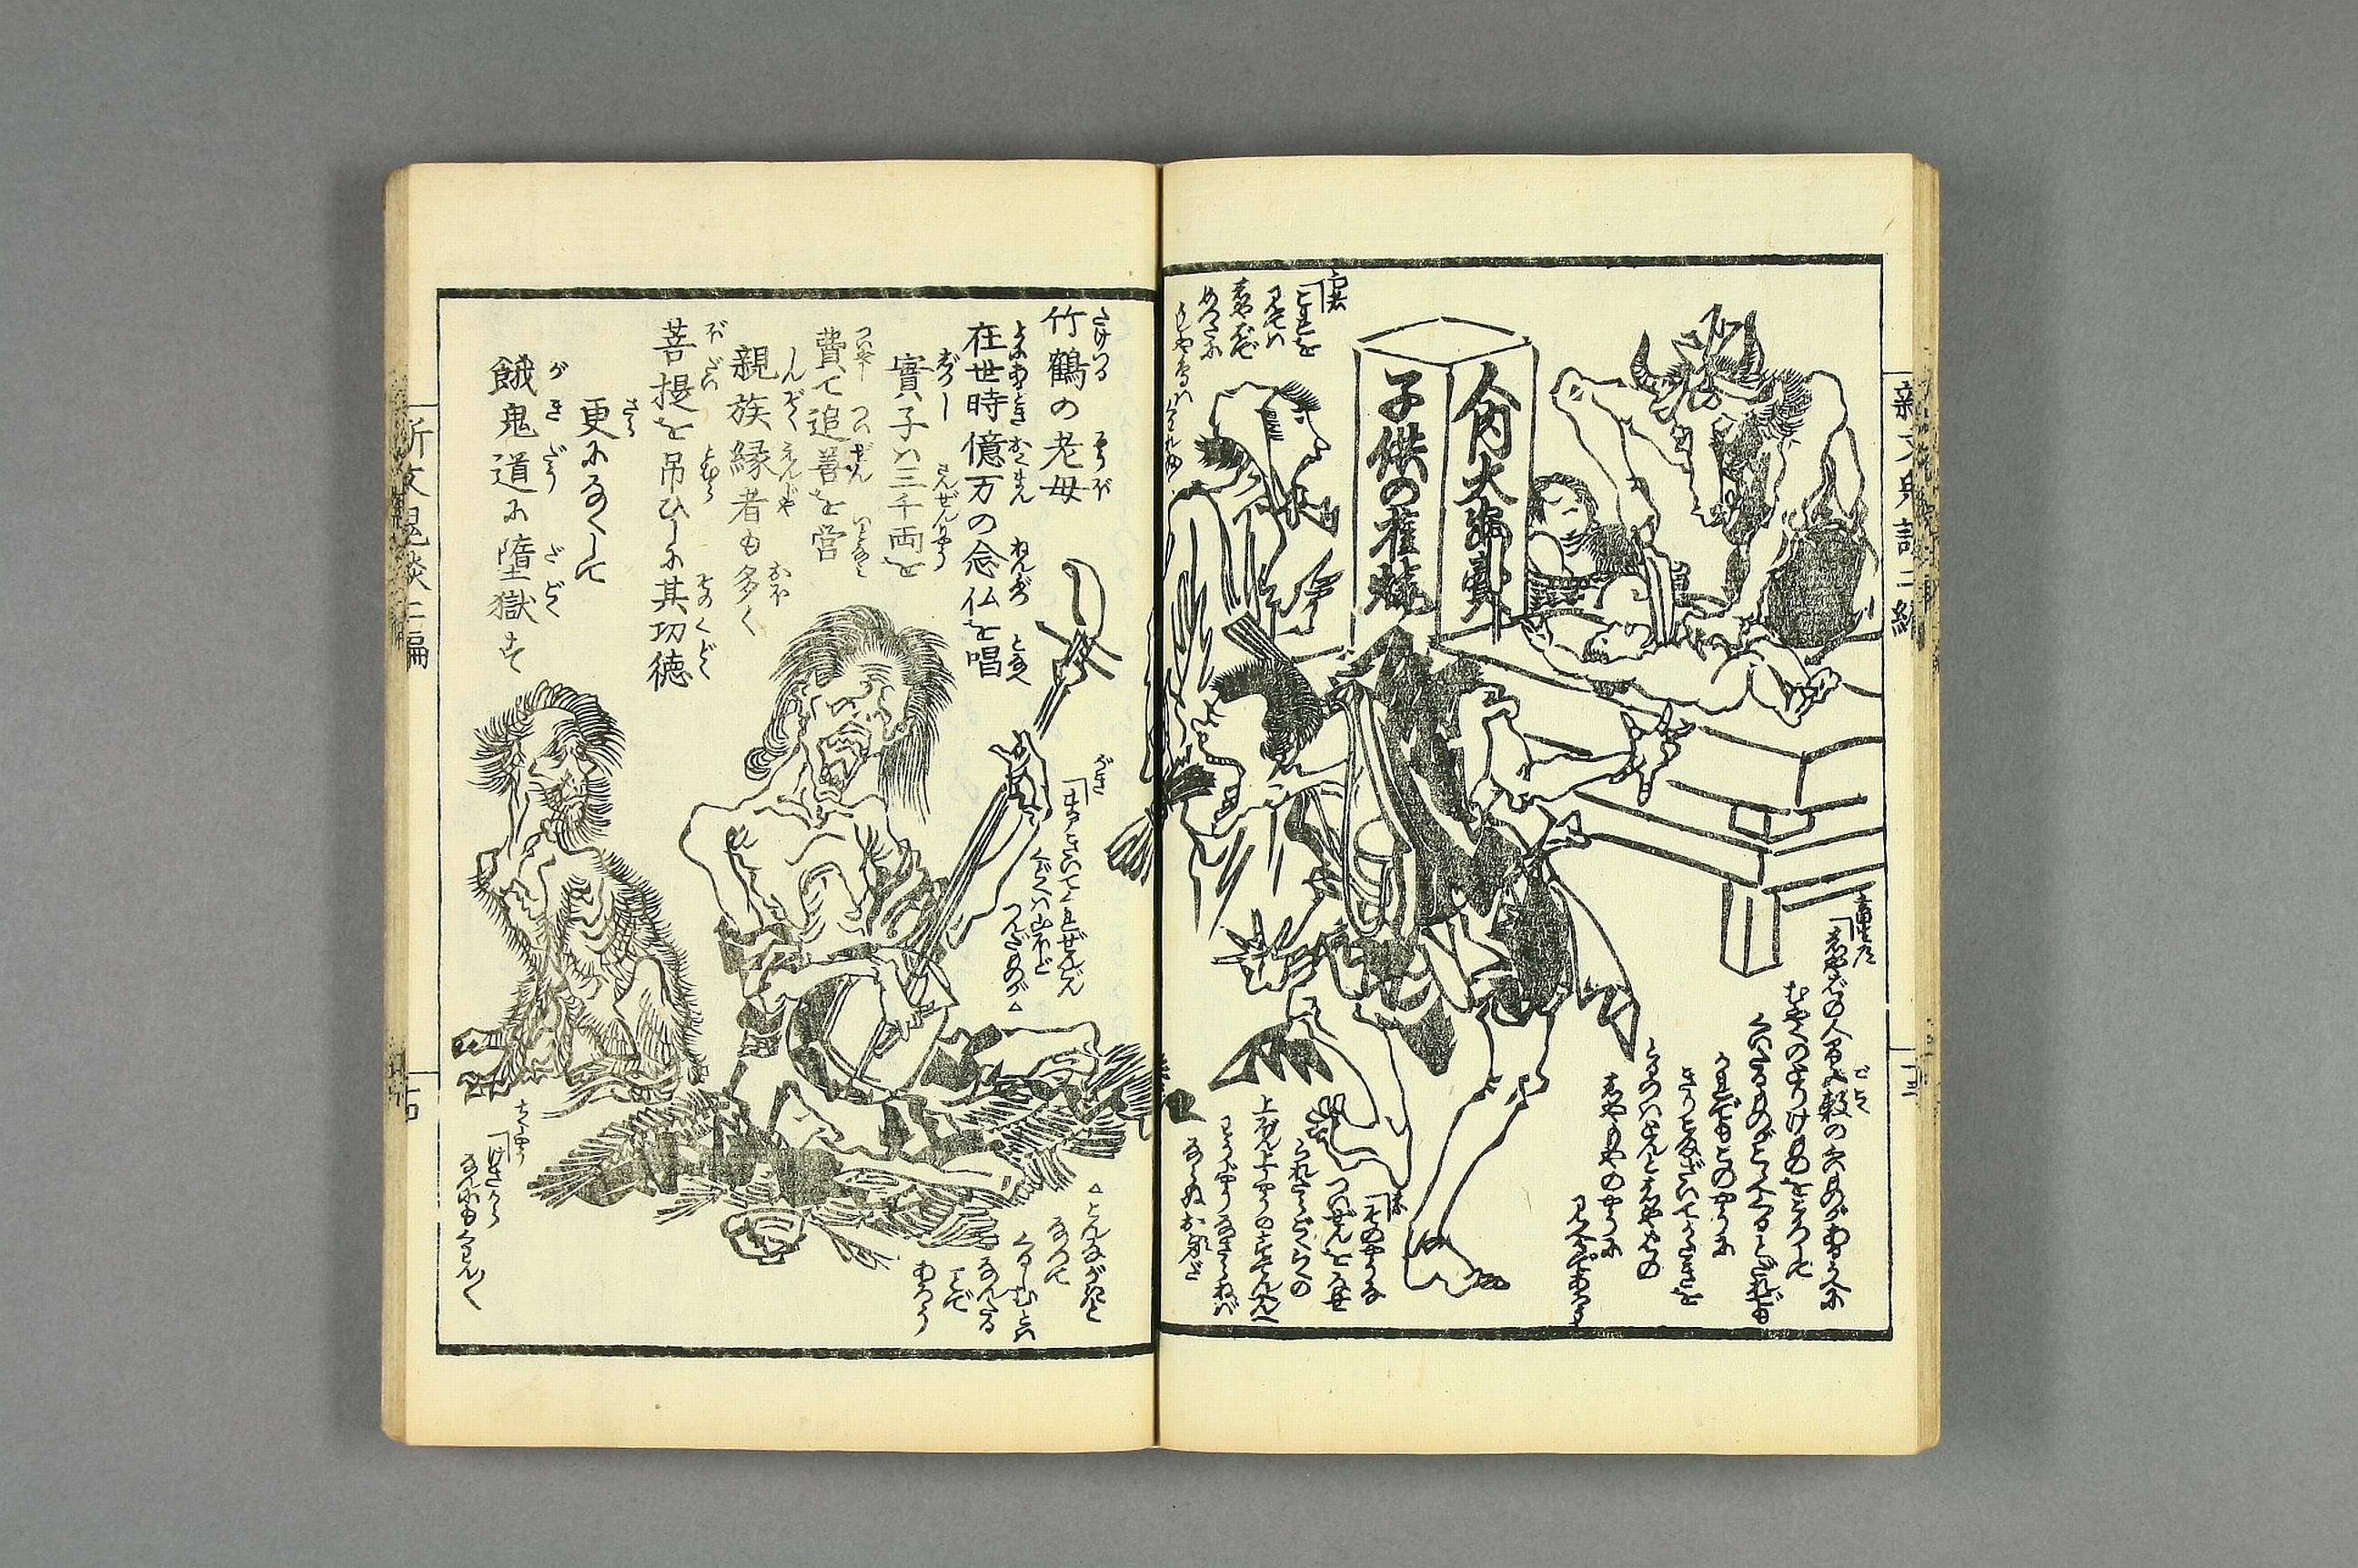 Project MUSE - The Art of Reframing the News: Early Meiji Shinbun